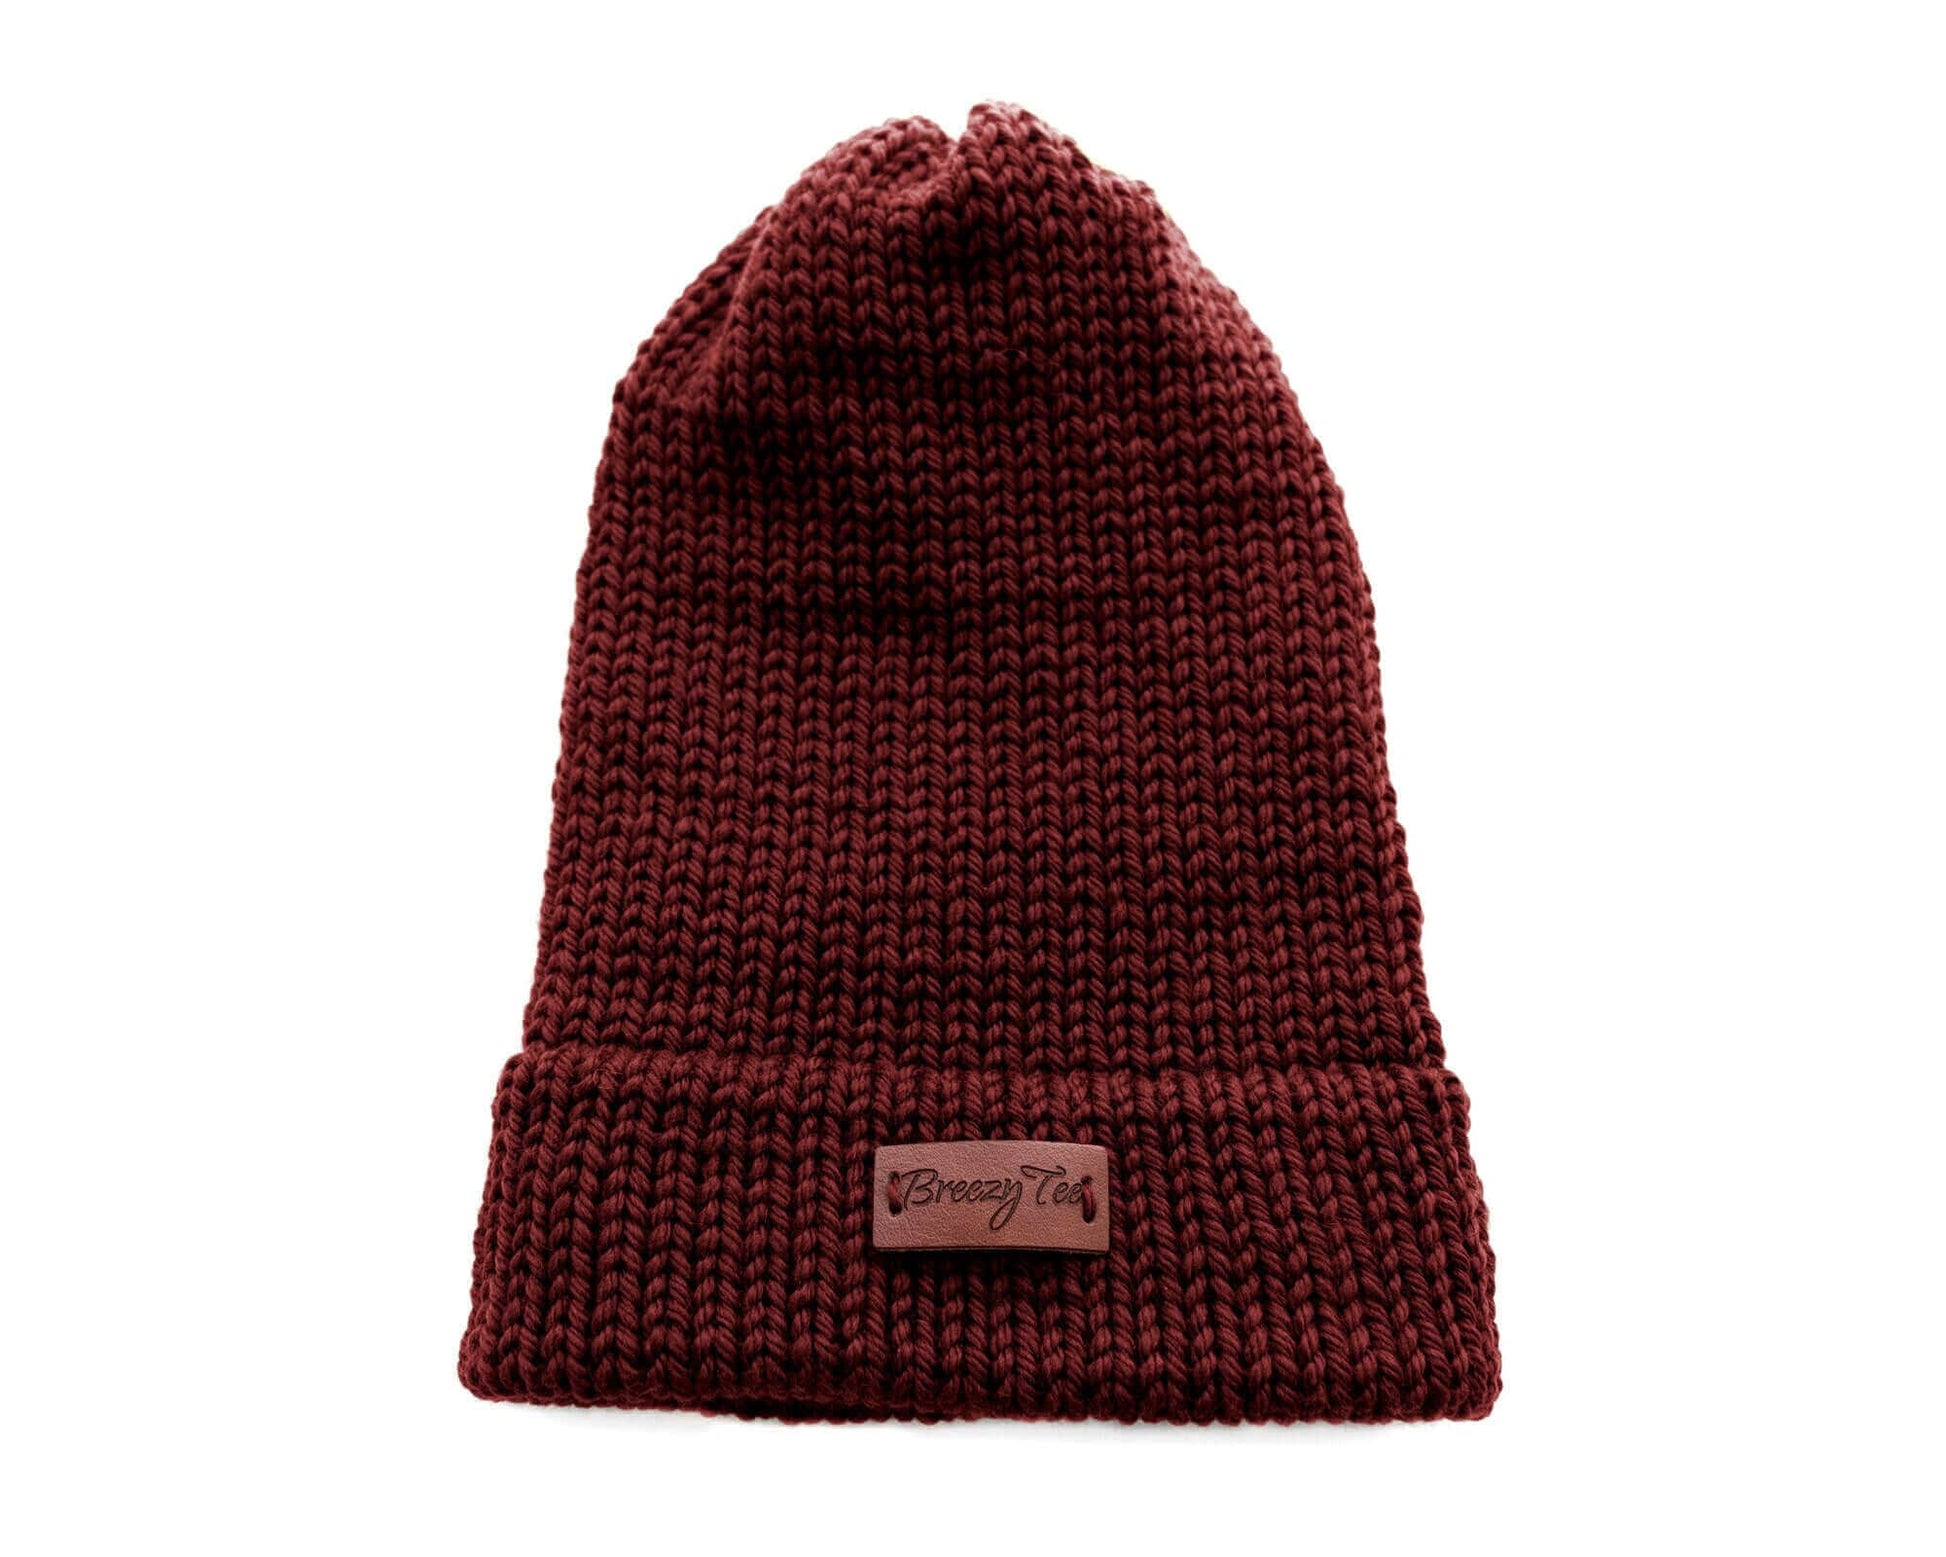 Satin Lined Knit Beanie Bordeaux Wool Mix